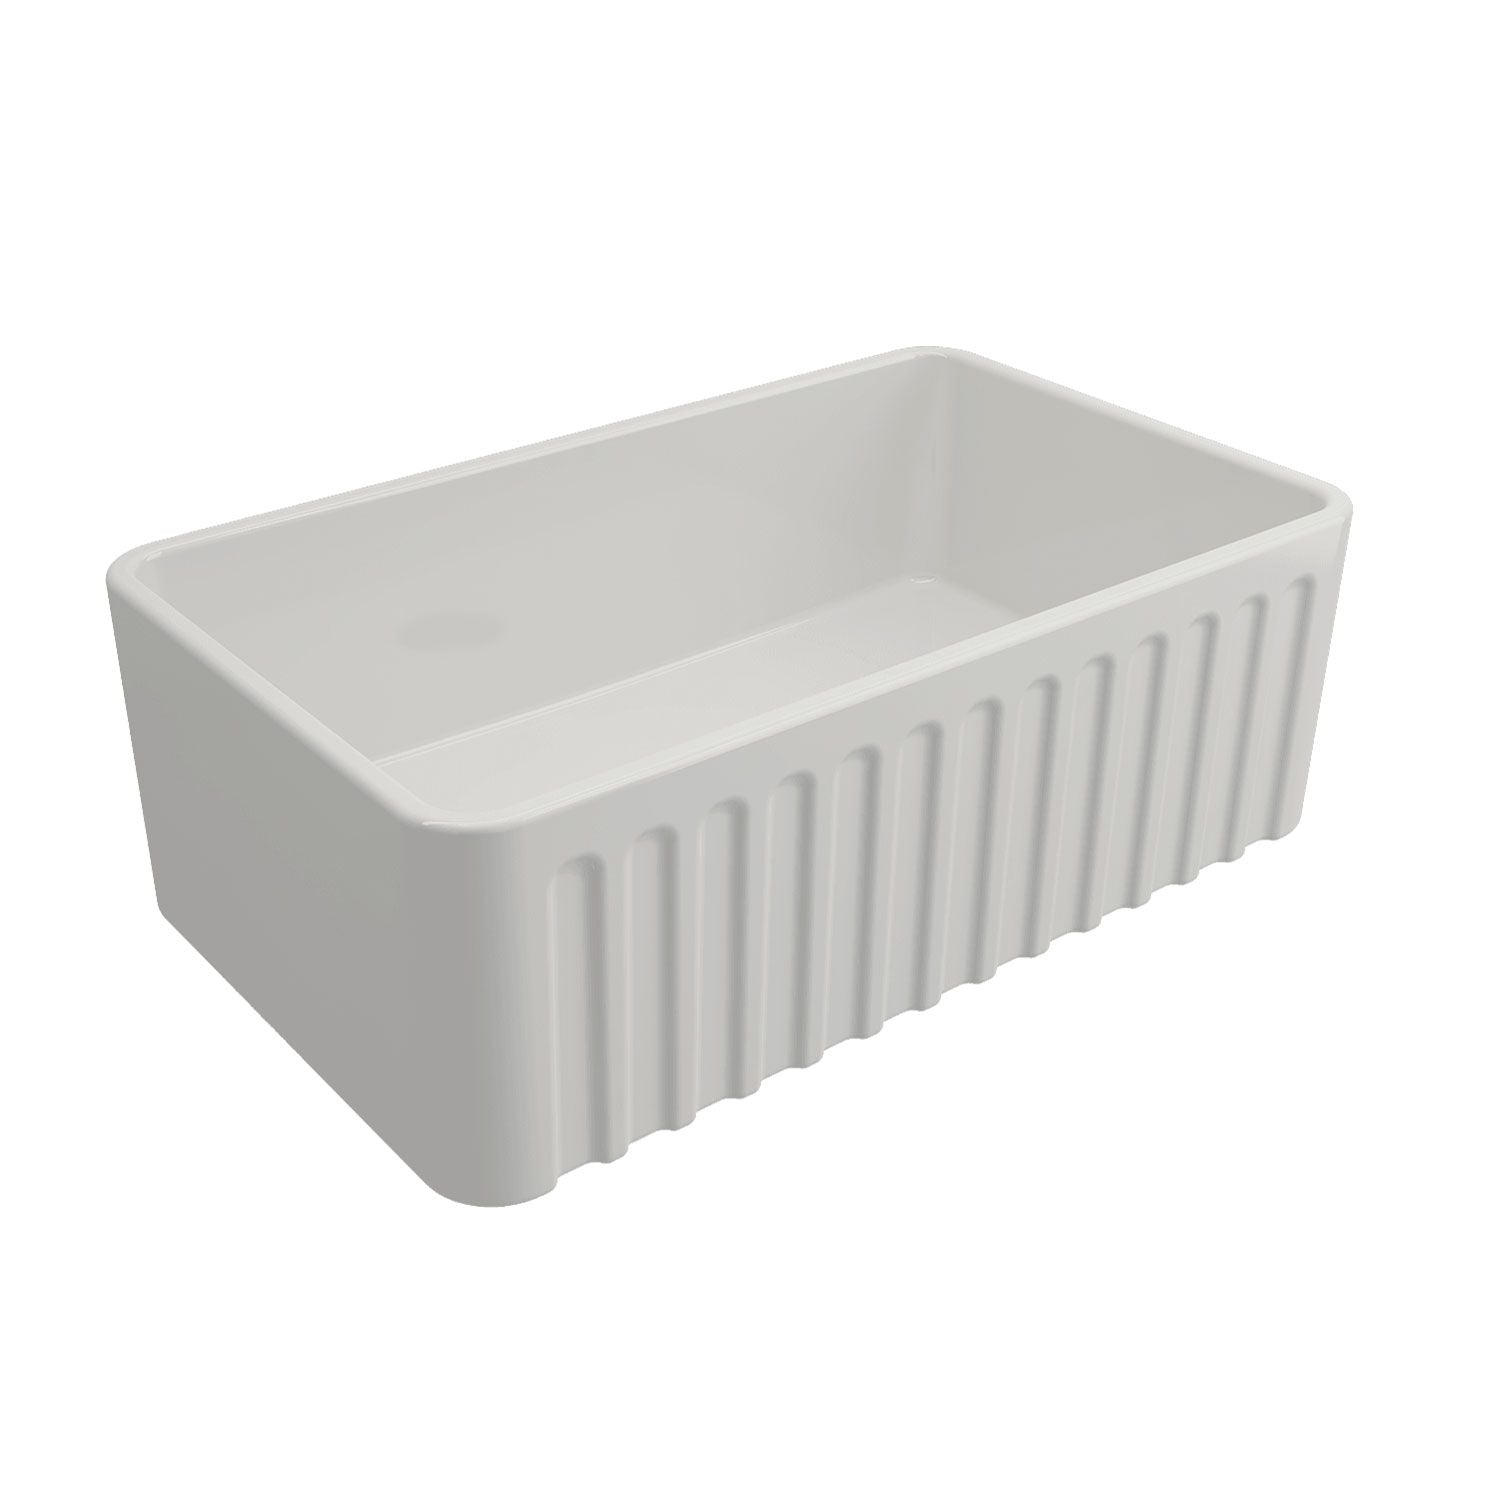 TURNER HASTINGS NOVI RIBBED FARMHOUSE BUTLER SINK WITH OVERFLOW GLOSS WHITE 765MM